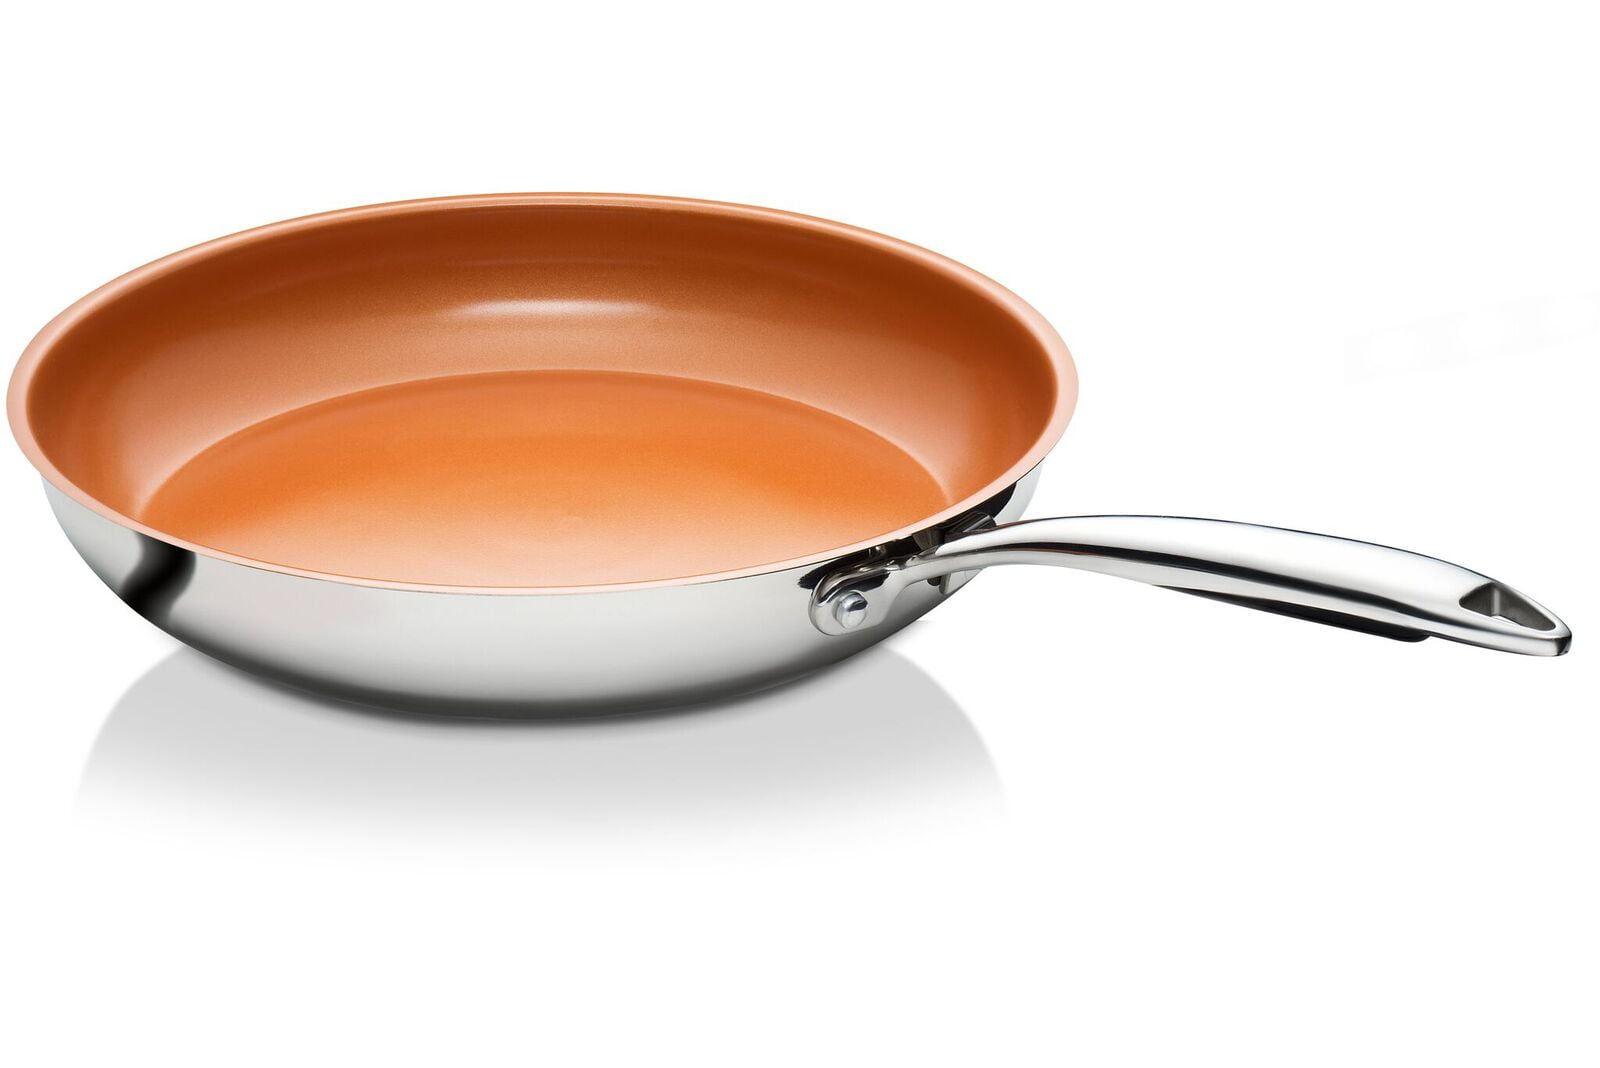 Gotham Steel Deep Square Non-stick Ceramic Copper Frying Pan for sale online 